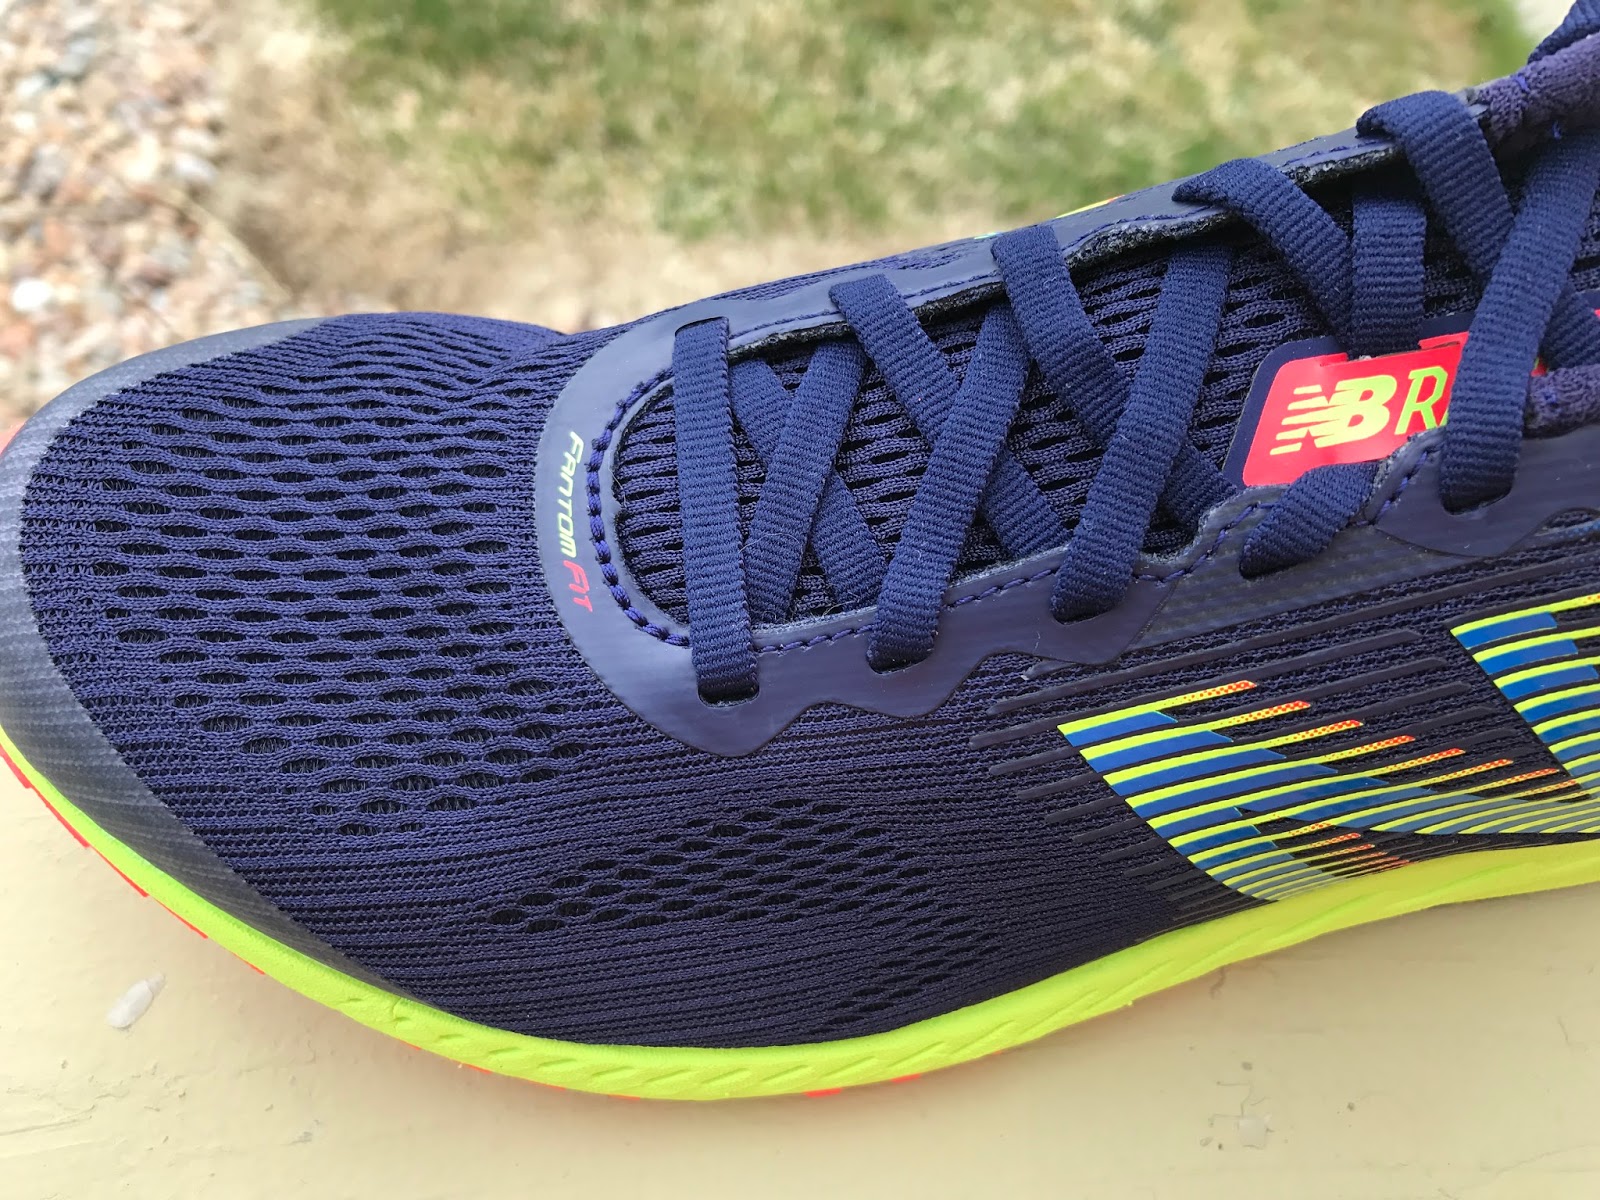 Road New Balance RC1400 v5 Review: Zoom!